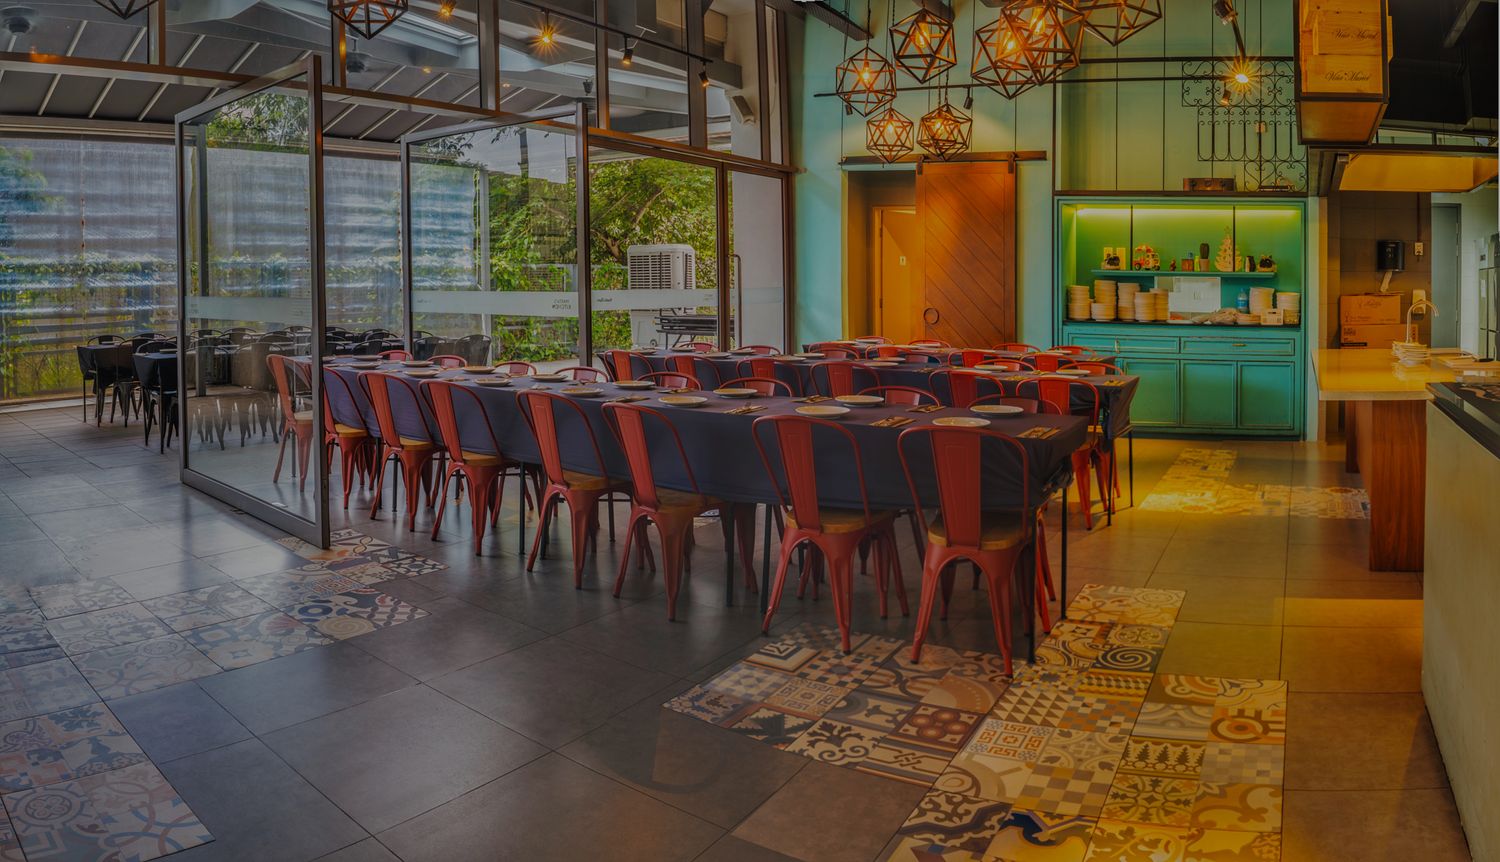 Marta's Kitchen | An Event Space Like No Other